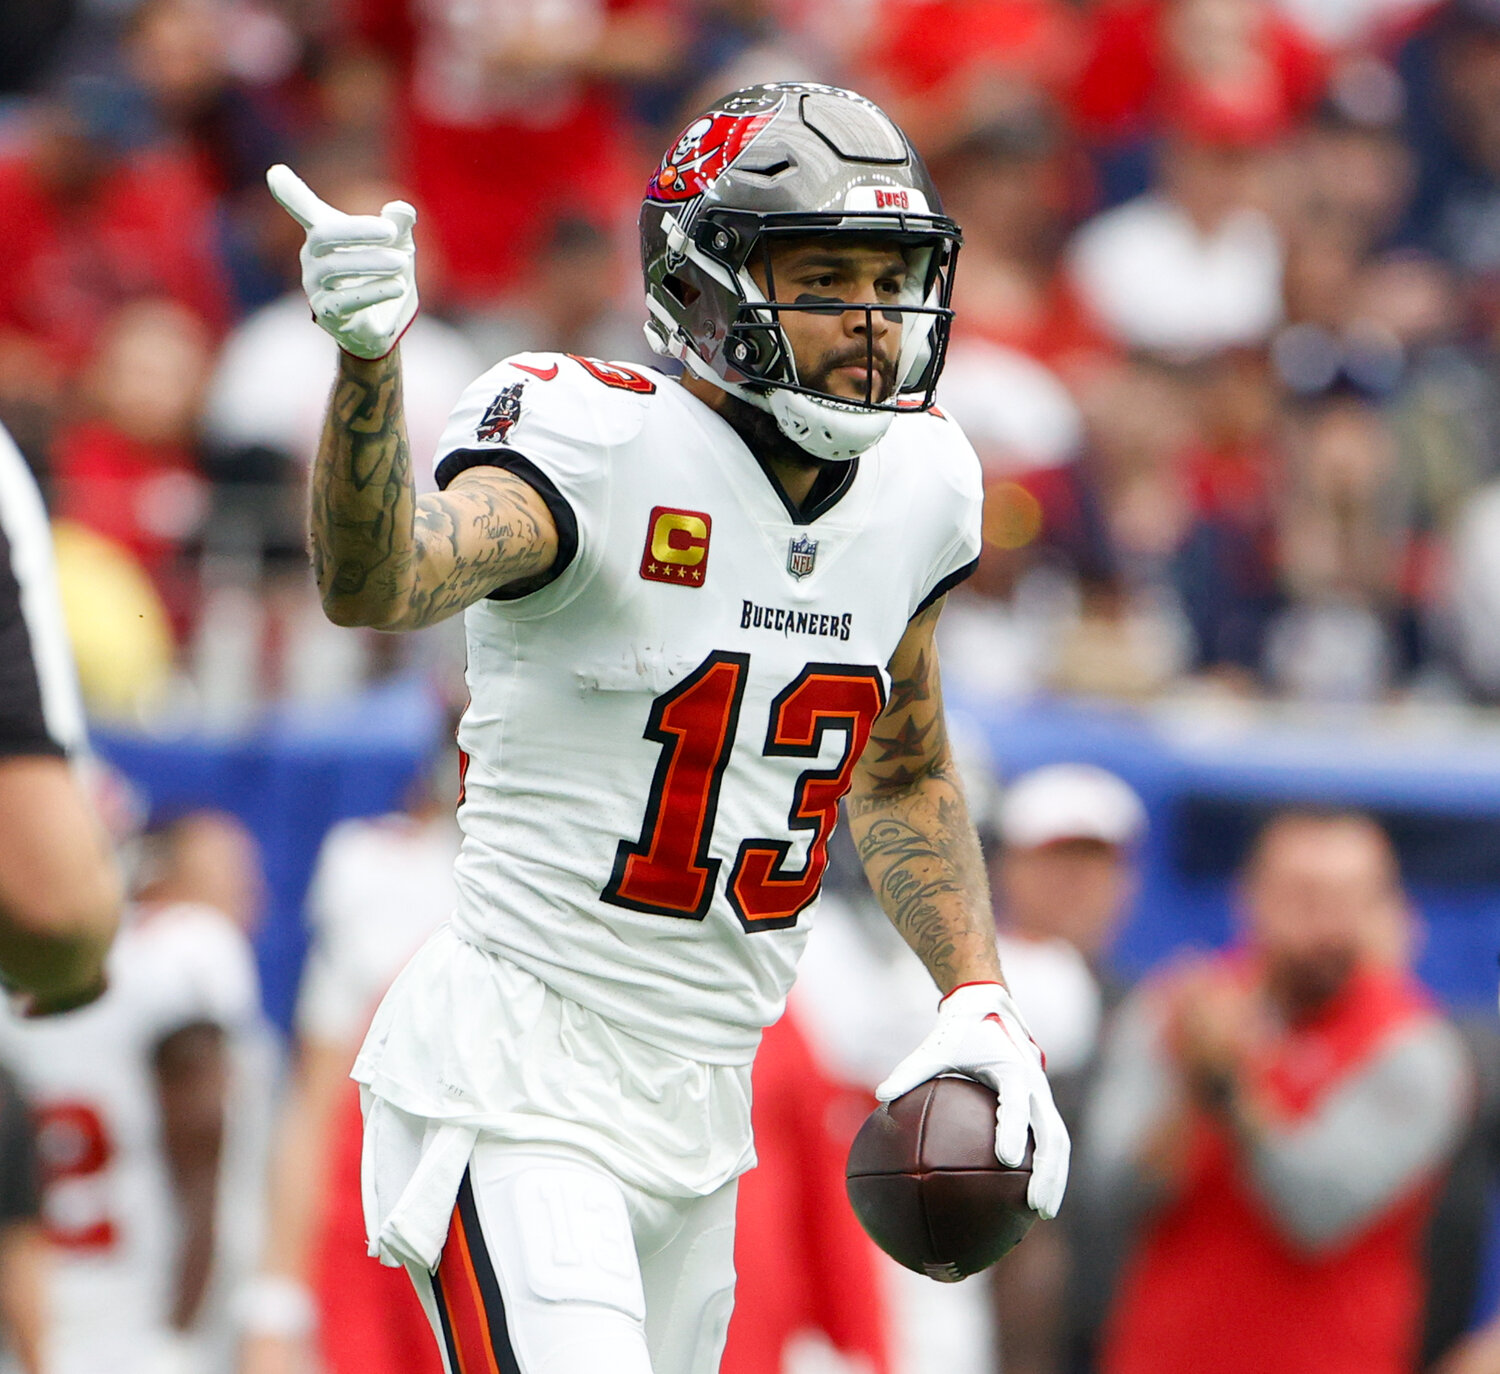 Buccaneers wide receiver Mike Evans (13) gestures for a first down after a catch during an NFL game between the Houston Texans and the Tampa Bay Buccaneers on November 5, 2023 in Houston.